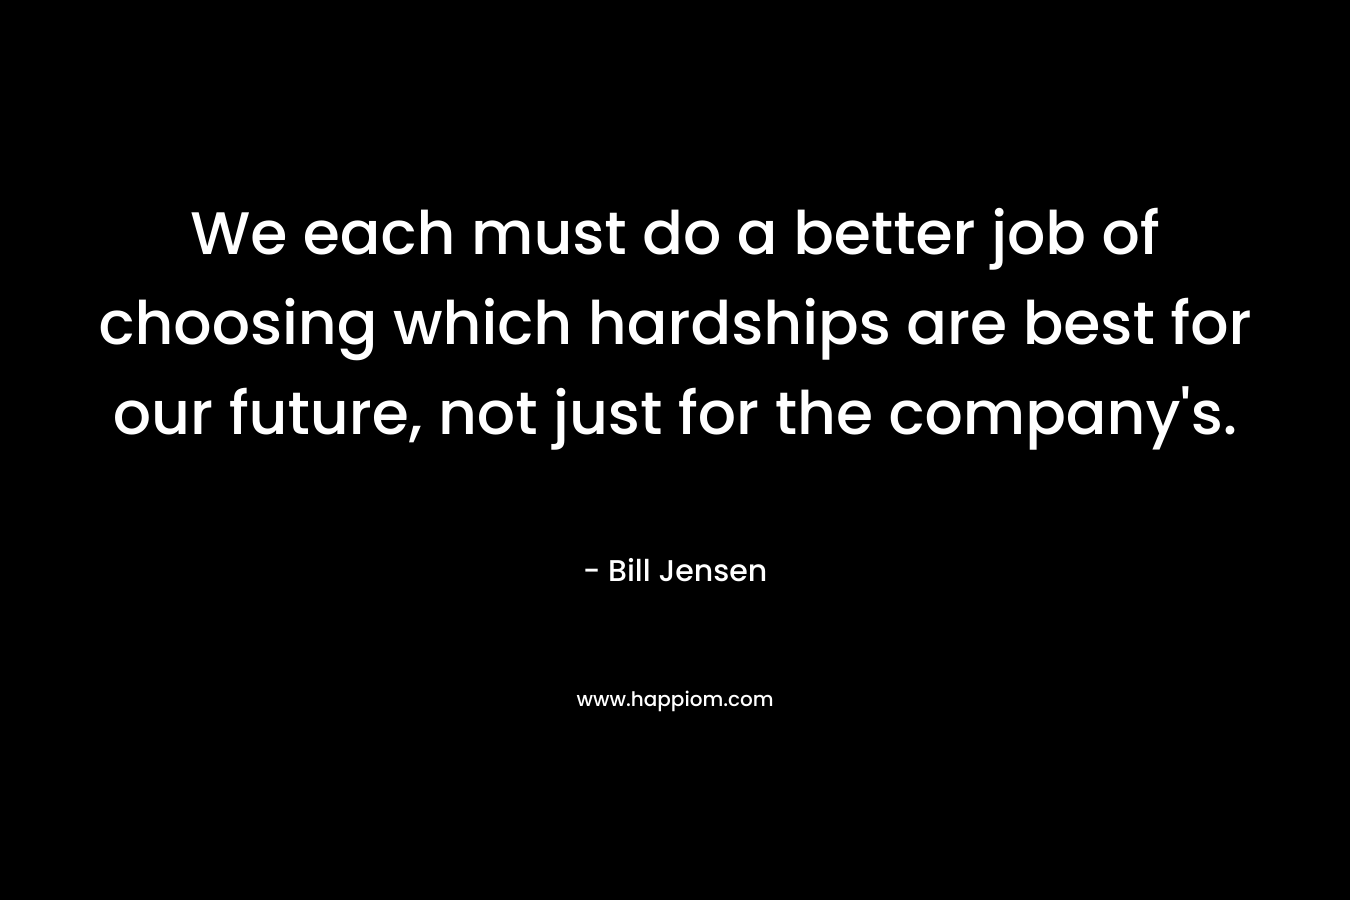 We each must do a better job of choosing which hardships are best for our future, not just for the company’s. – Bill Jensen